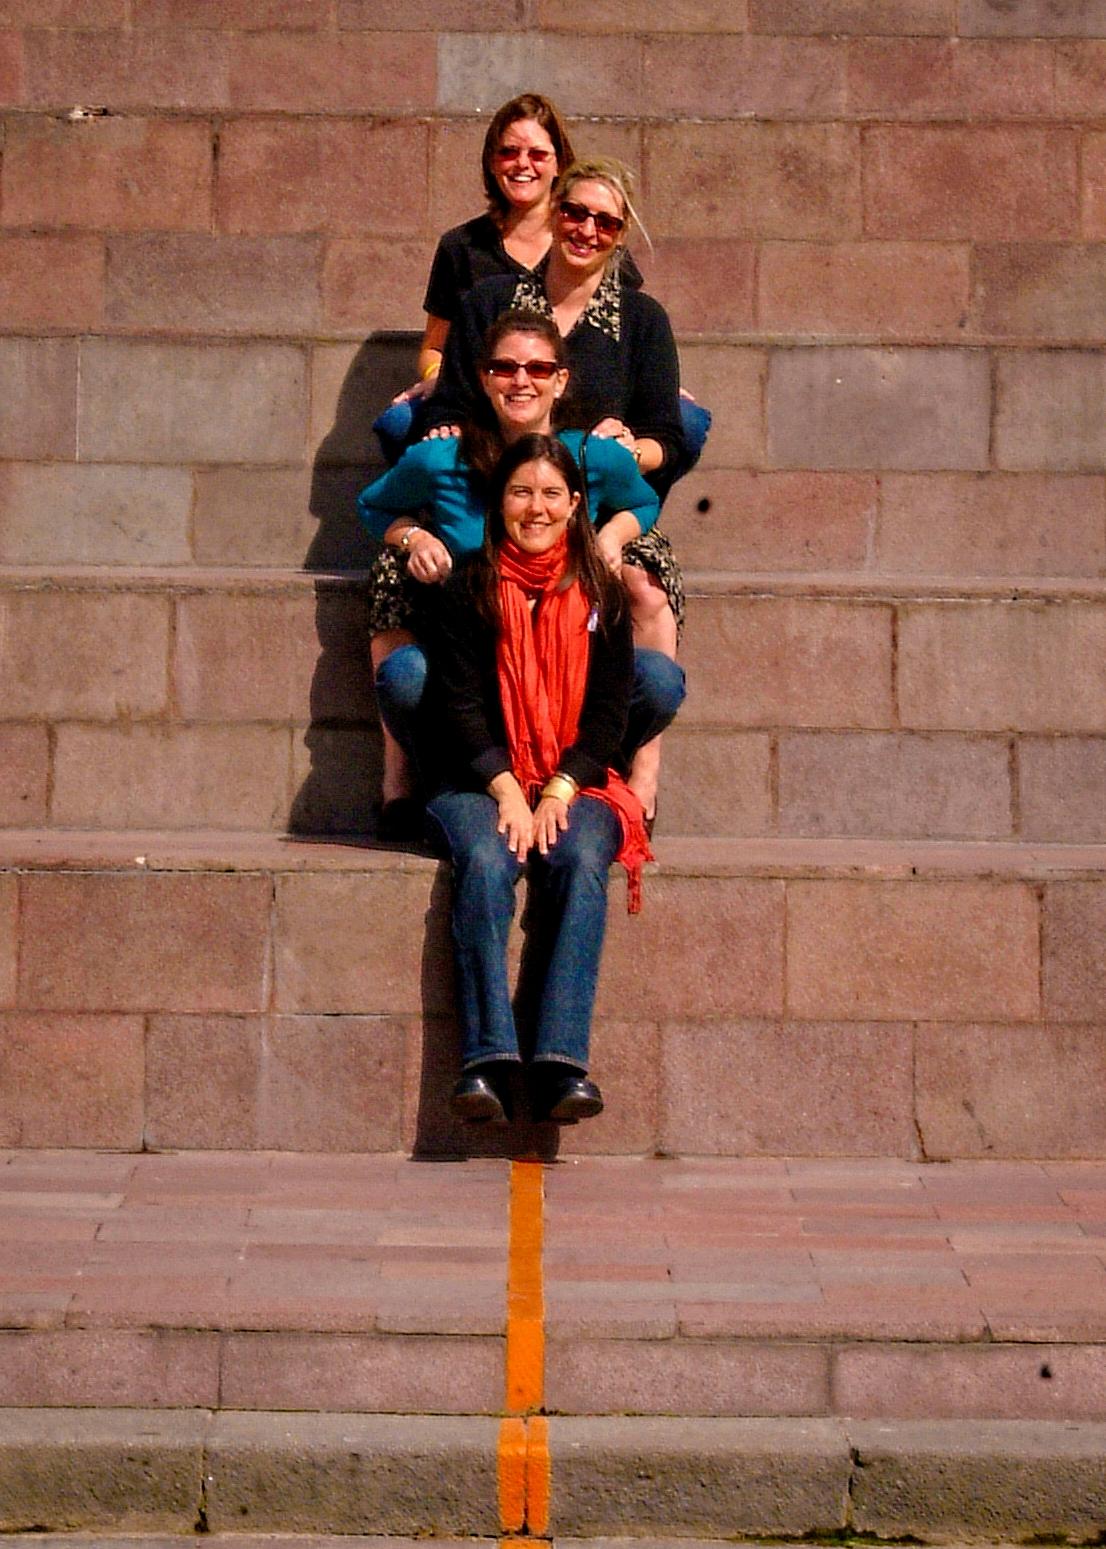 At this structure marking the equator 16 miles north of Quito, some American tourists place one foot in the Northern Hemisphere and the other in the Southern Hemisphere. Few who stop at the equator can resist the temptation to do this. (Copyright Fred J. Eckert)